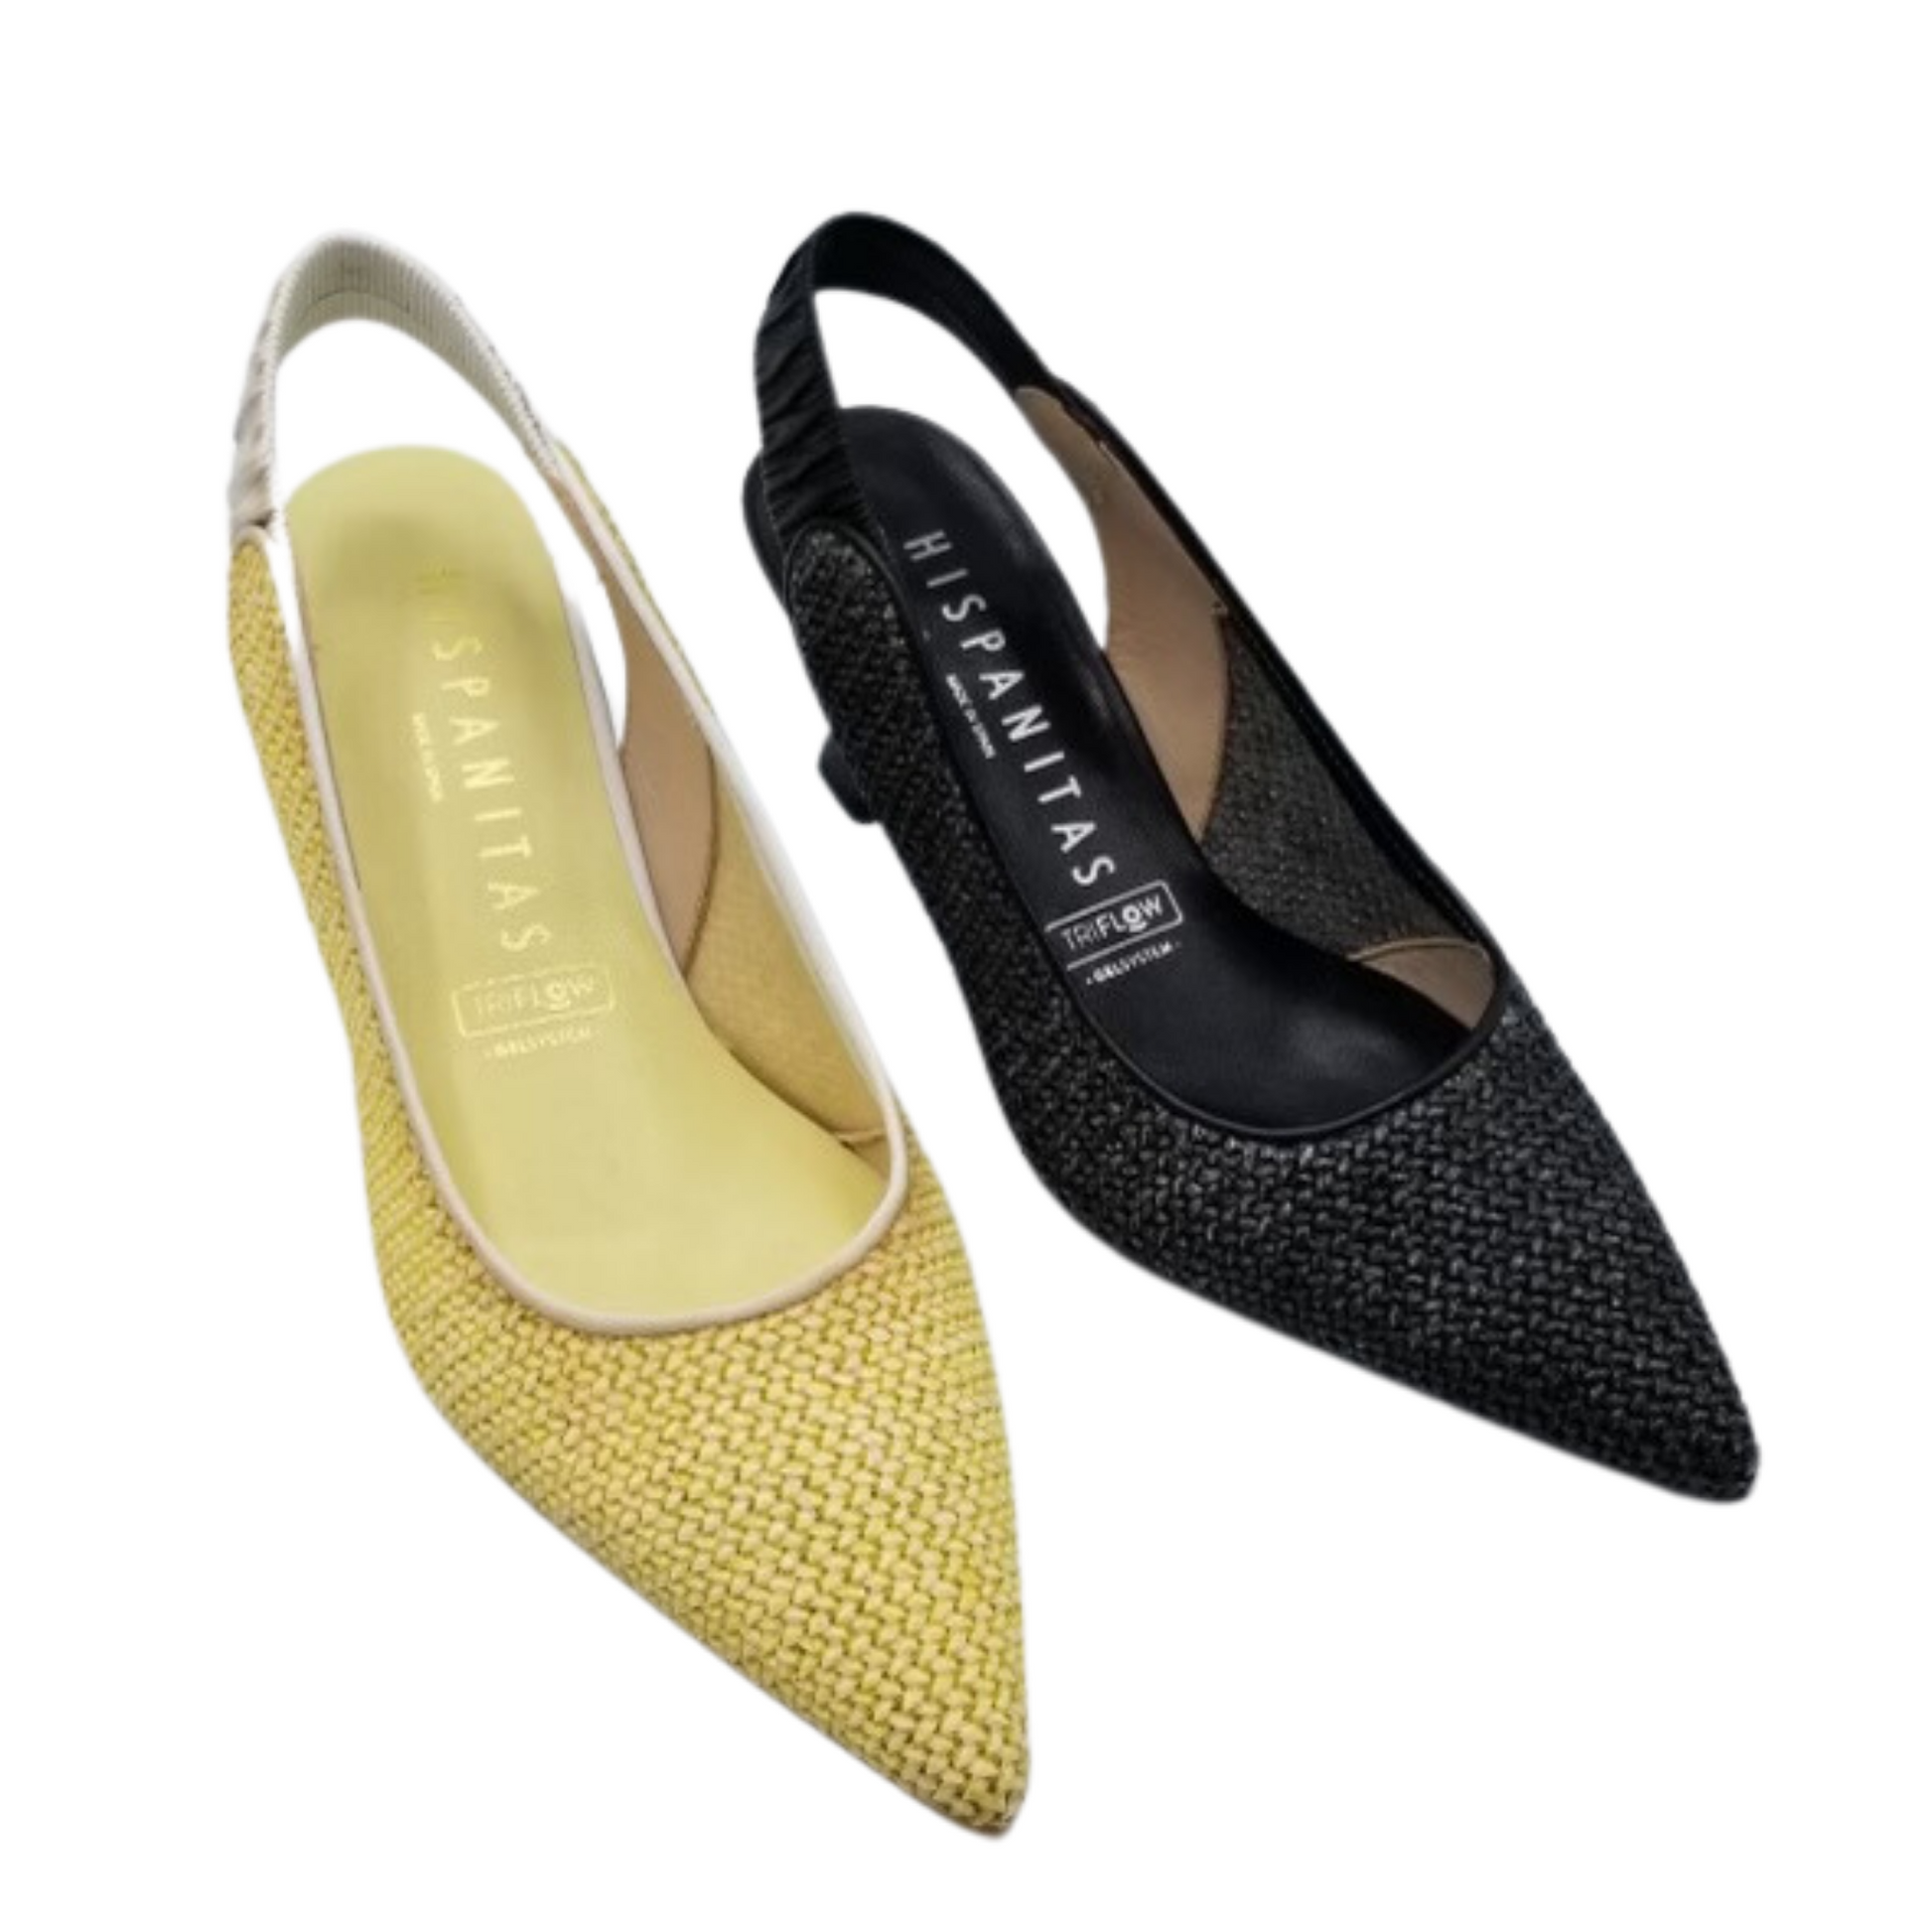 Angled front view of a pointed toe slingback pump in a textured leather.  Shown in a creamy yellow and black